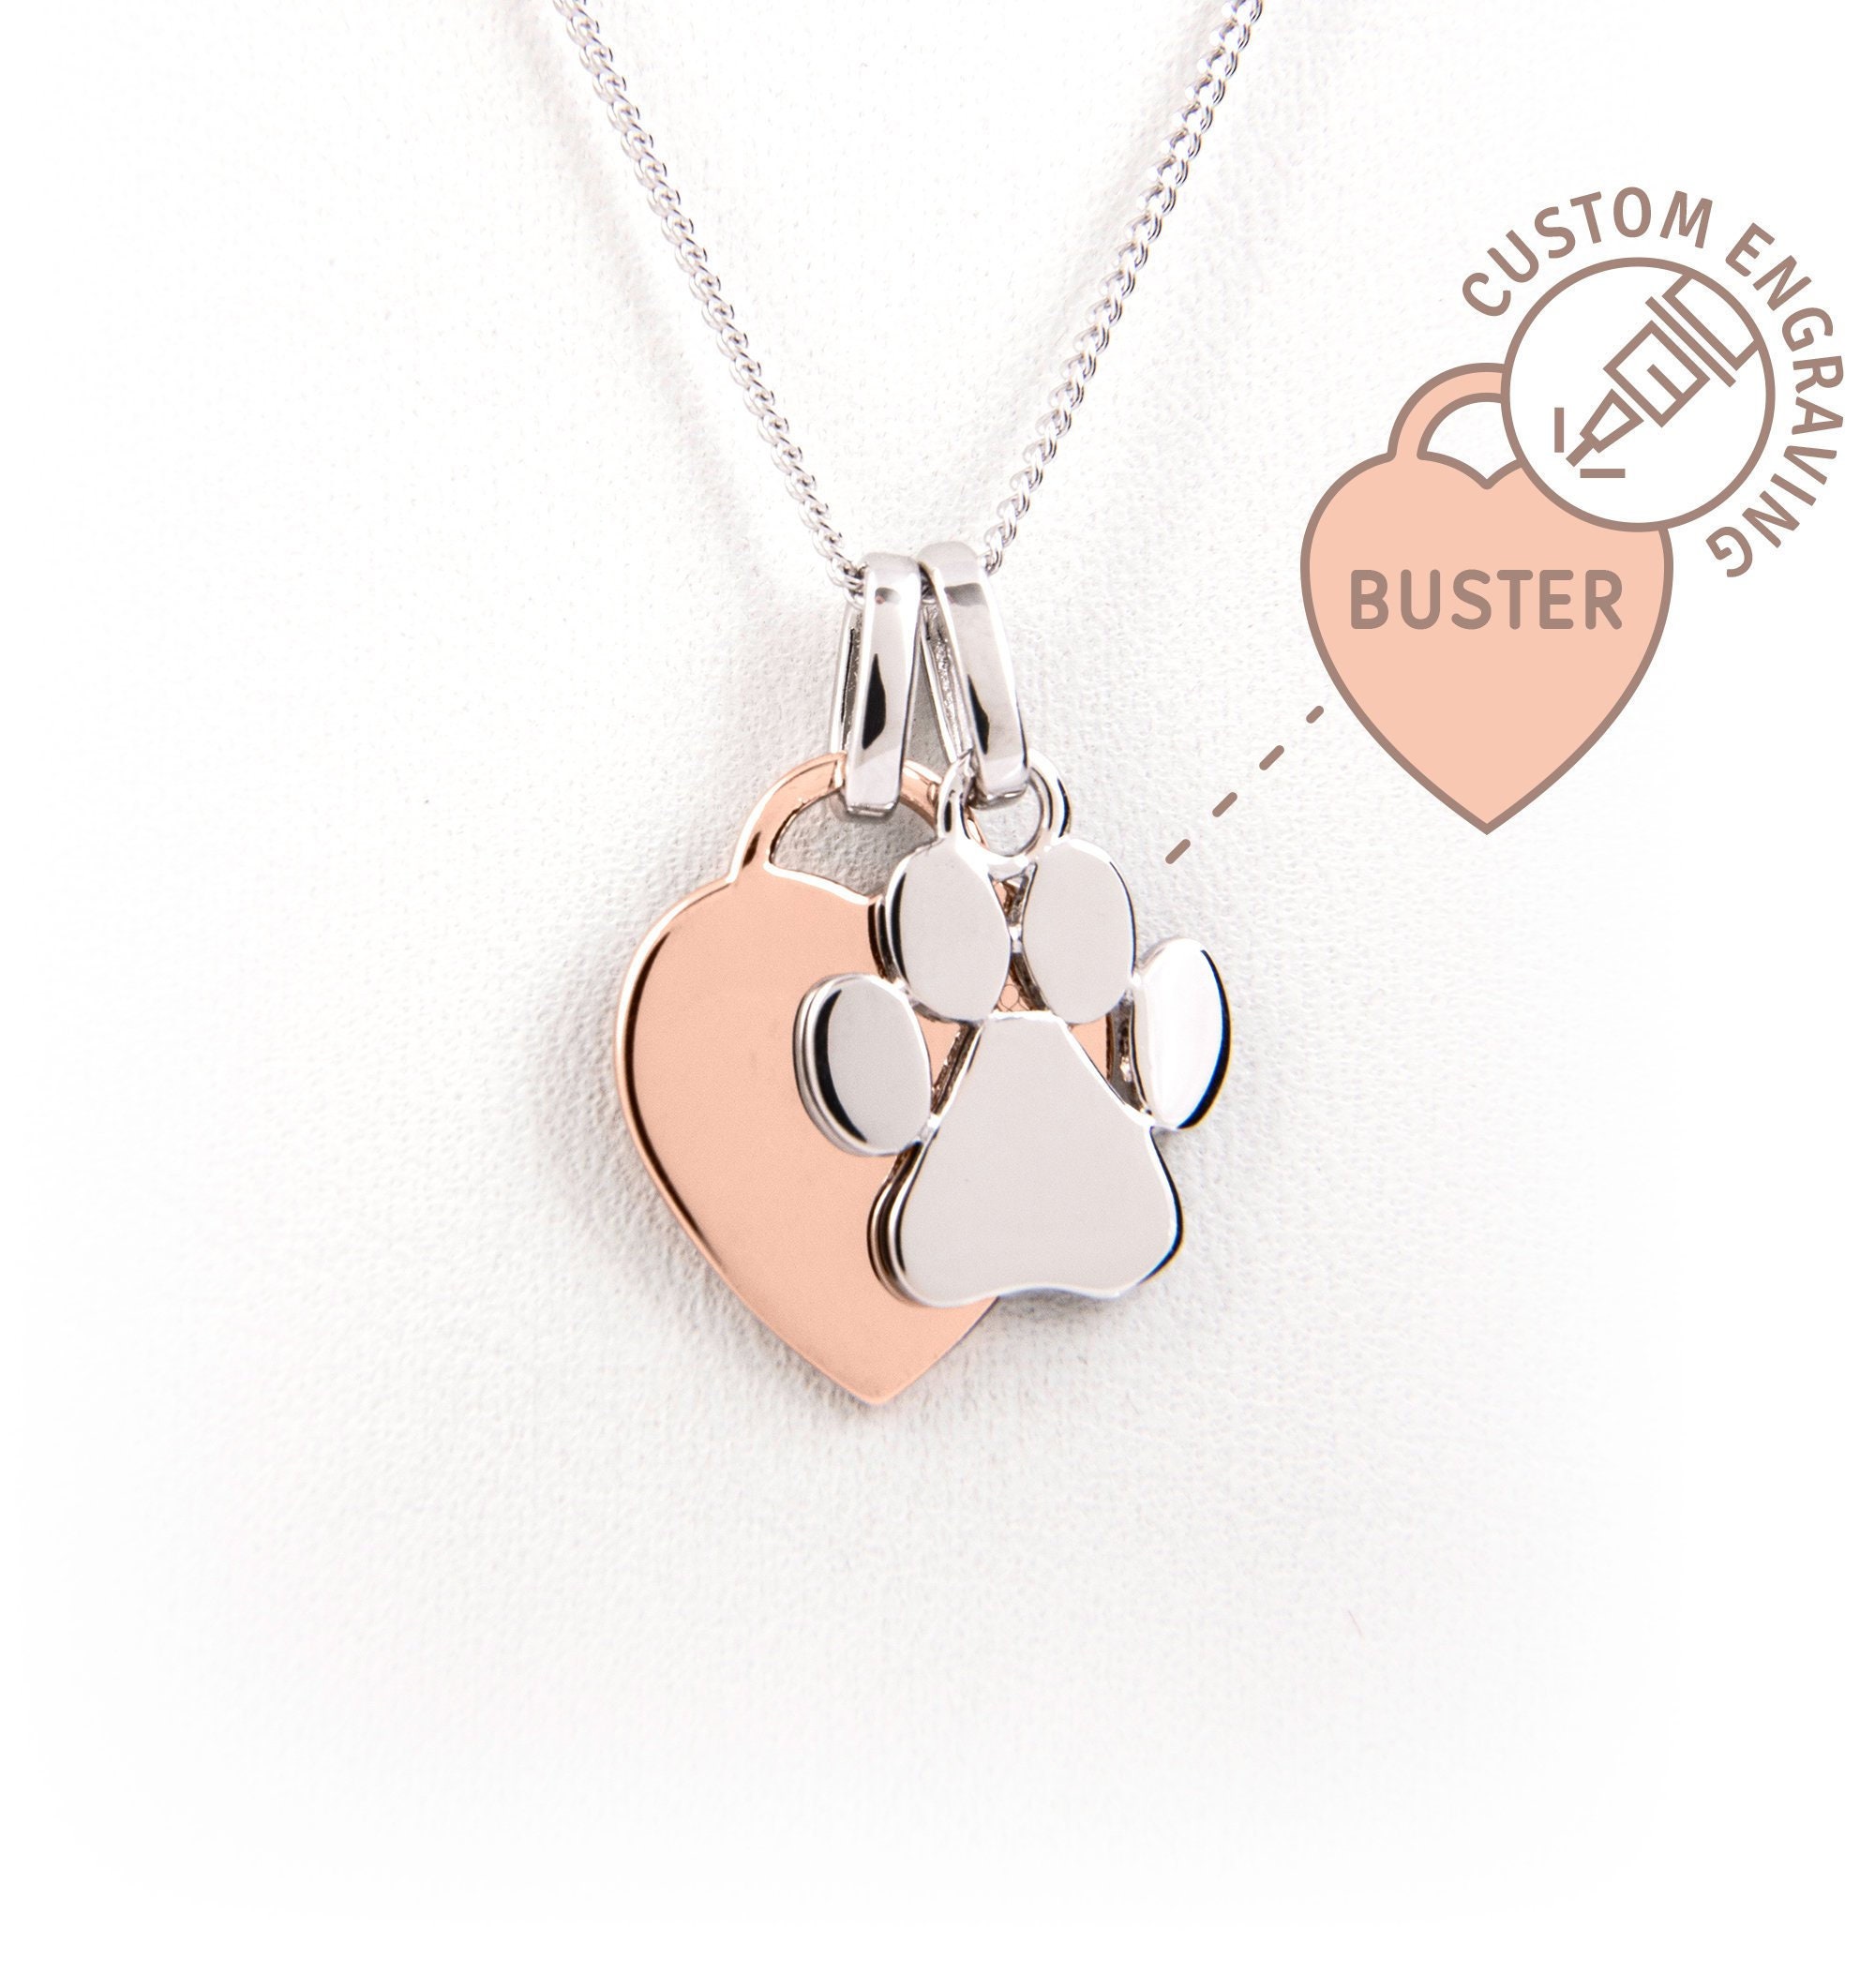 Dog Owner Paw Print Necklace with Custom Engraved Heart - 14k Rose Gold Plated Silver - Pet Gift, Dog Memorial Jewelrythumbnail